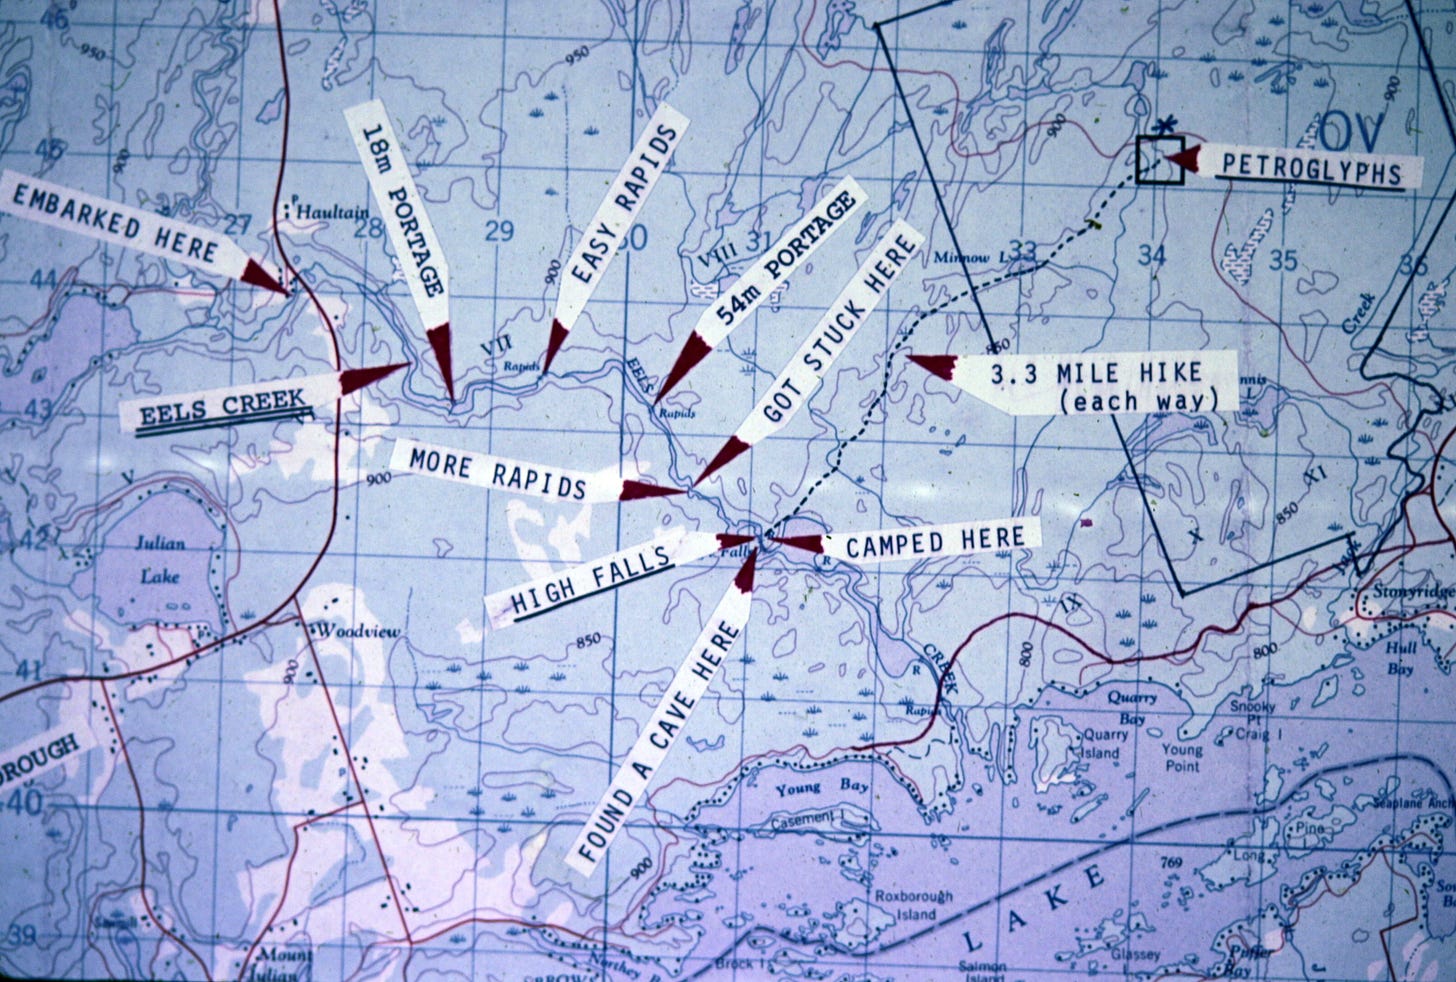 Annotated map, Eel's Creek